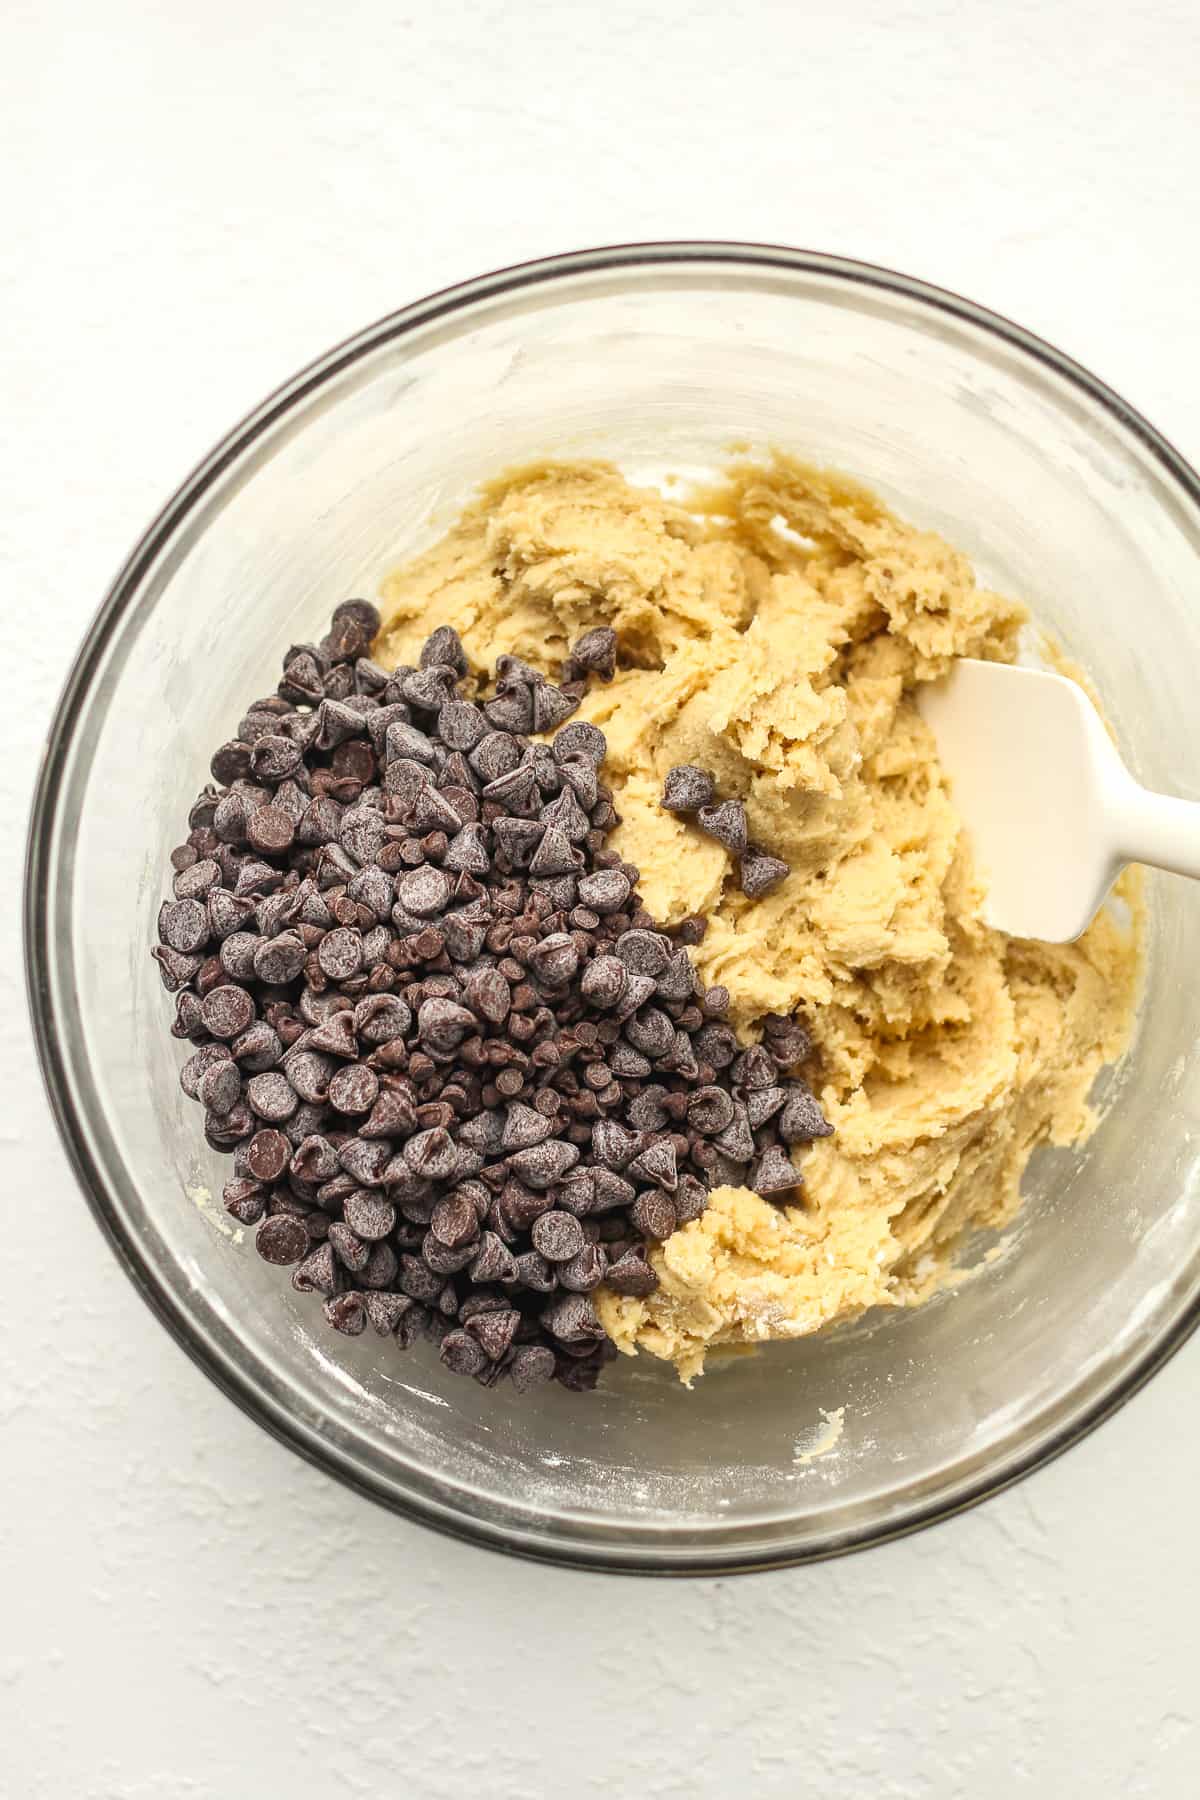 A bowl of the cookie dough with chocolate chips on top.